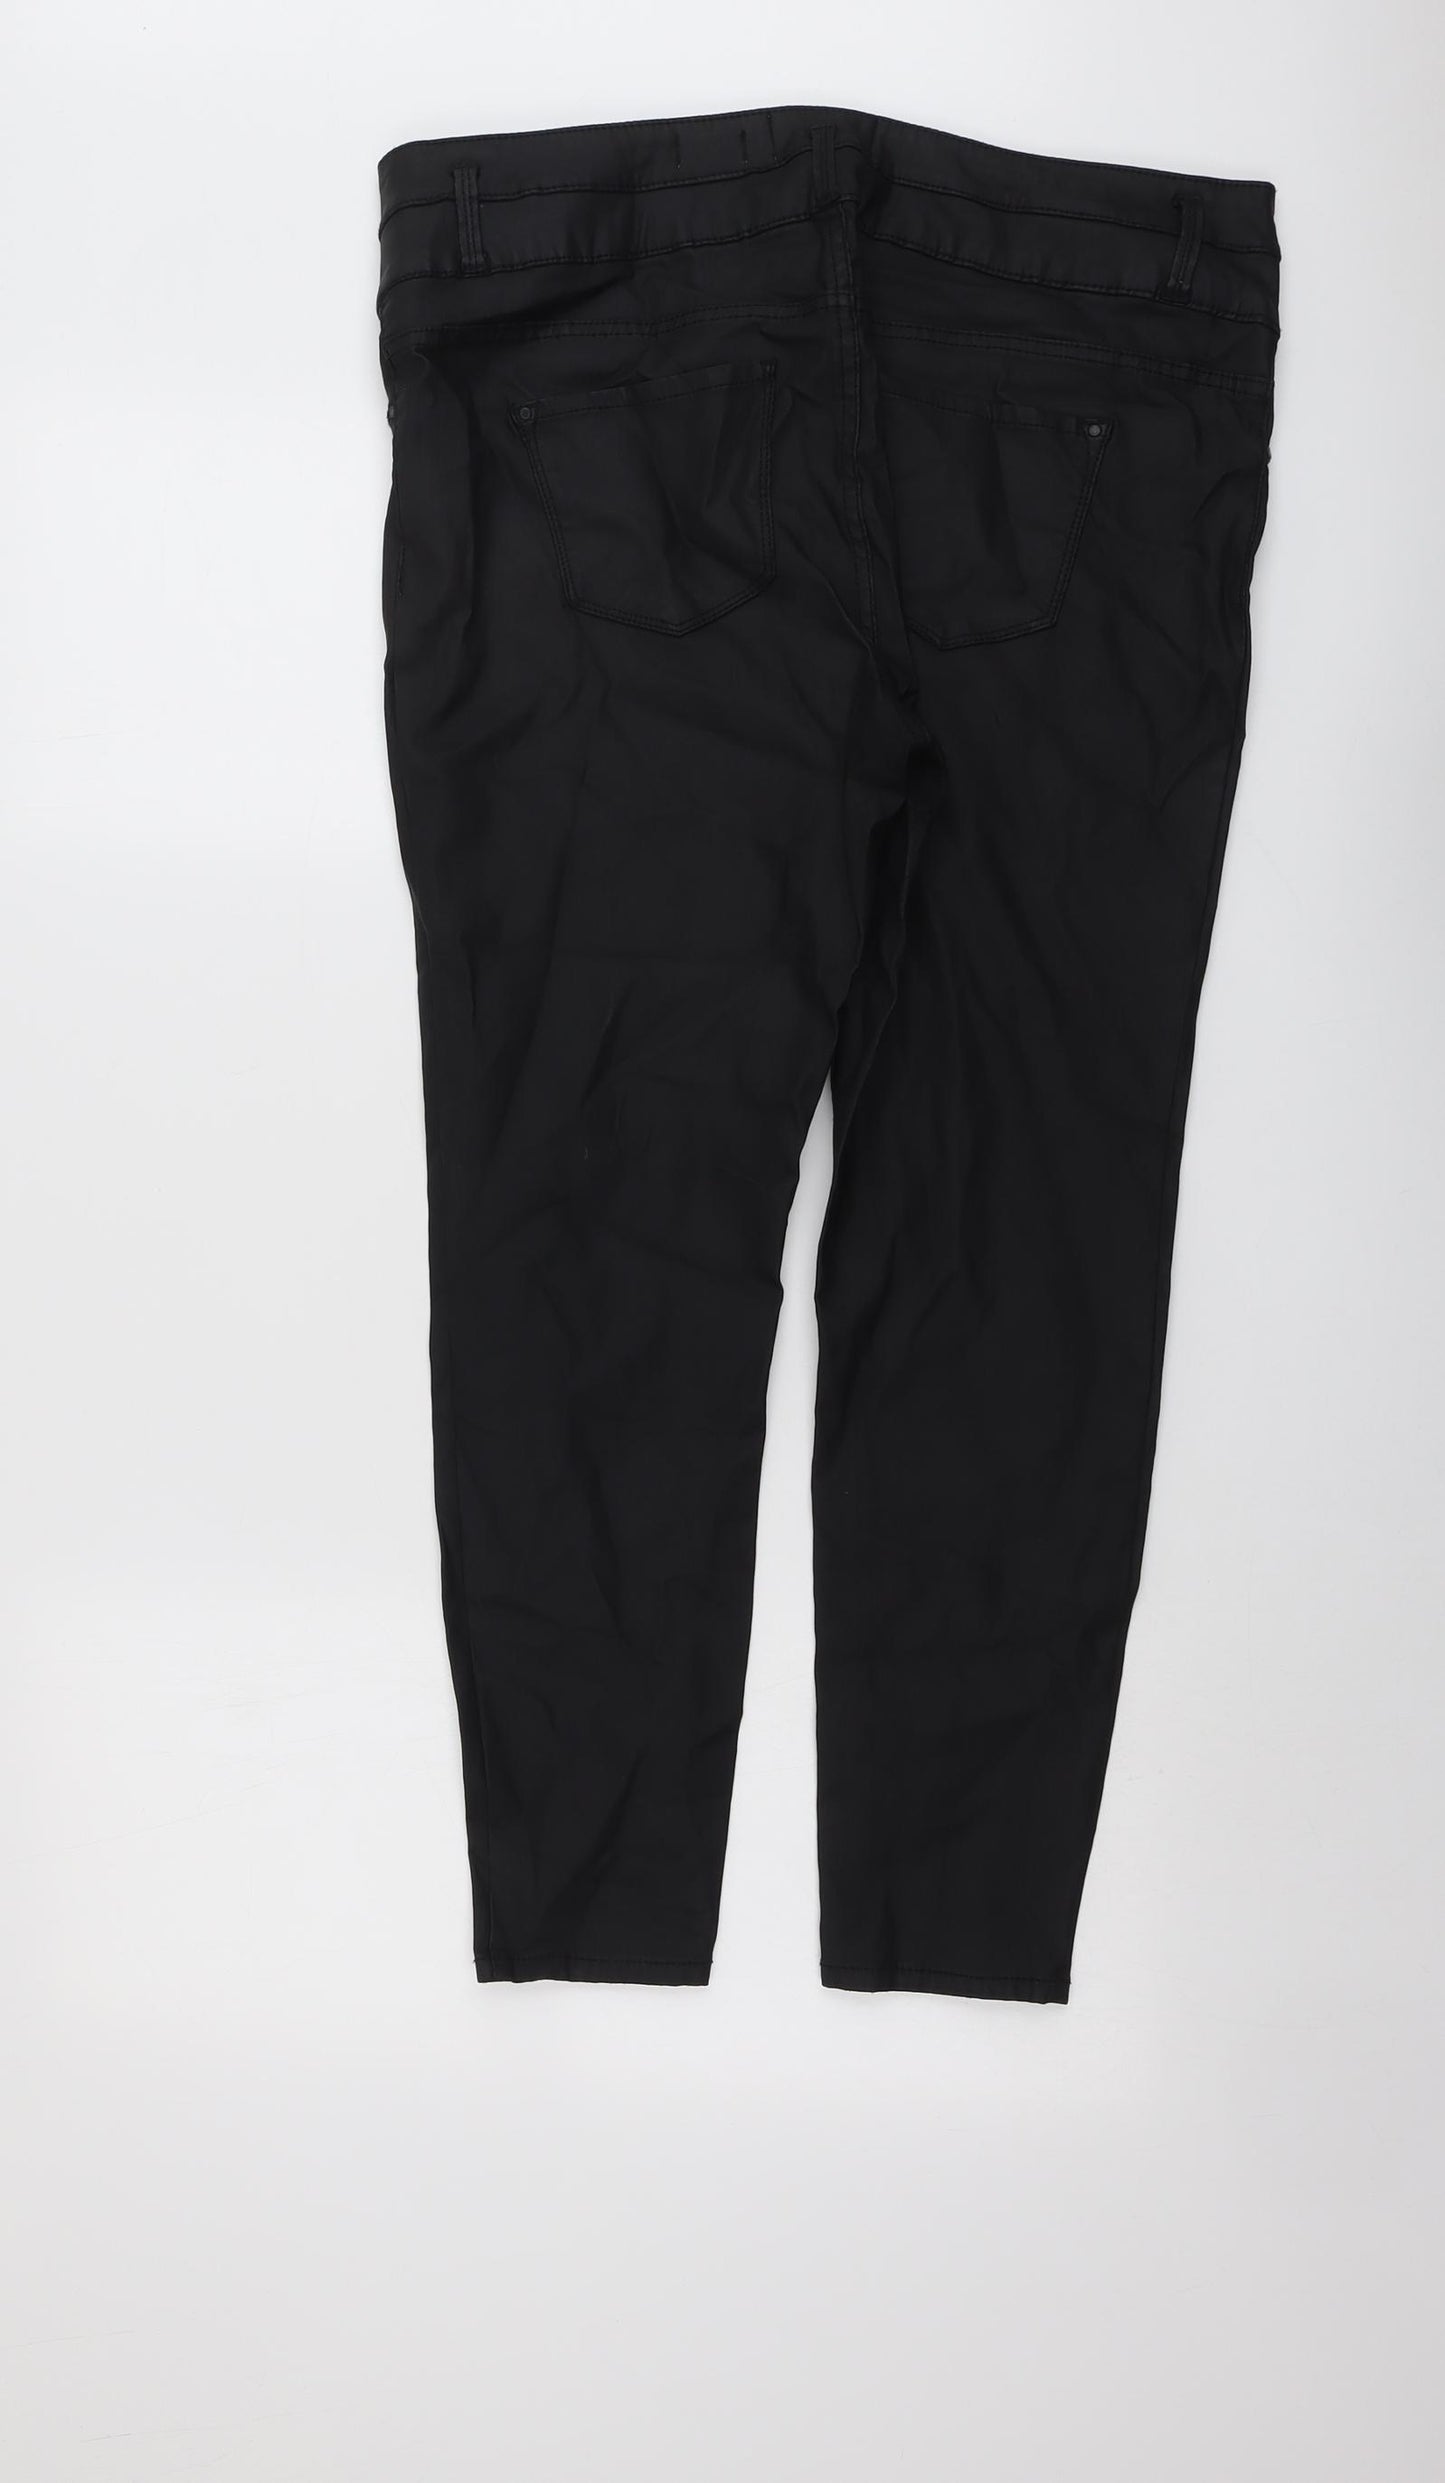 New Look Womens Black Viscose Trousers Size 18 L25 in Regular Button - Coated